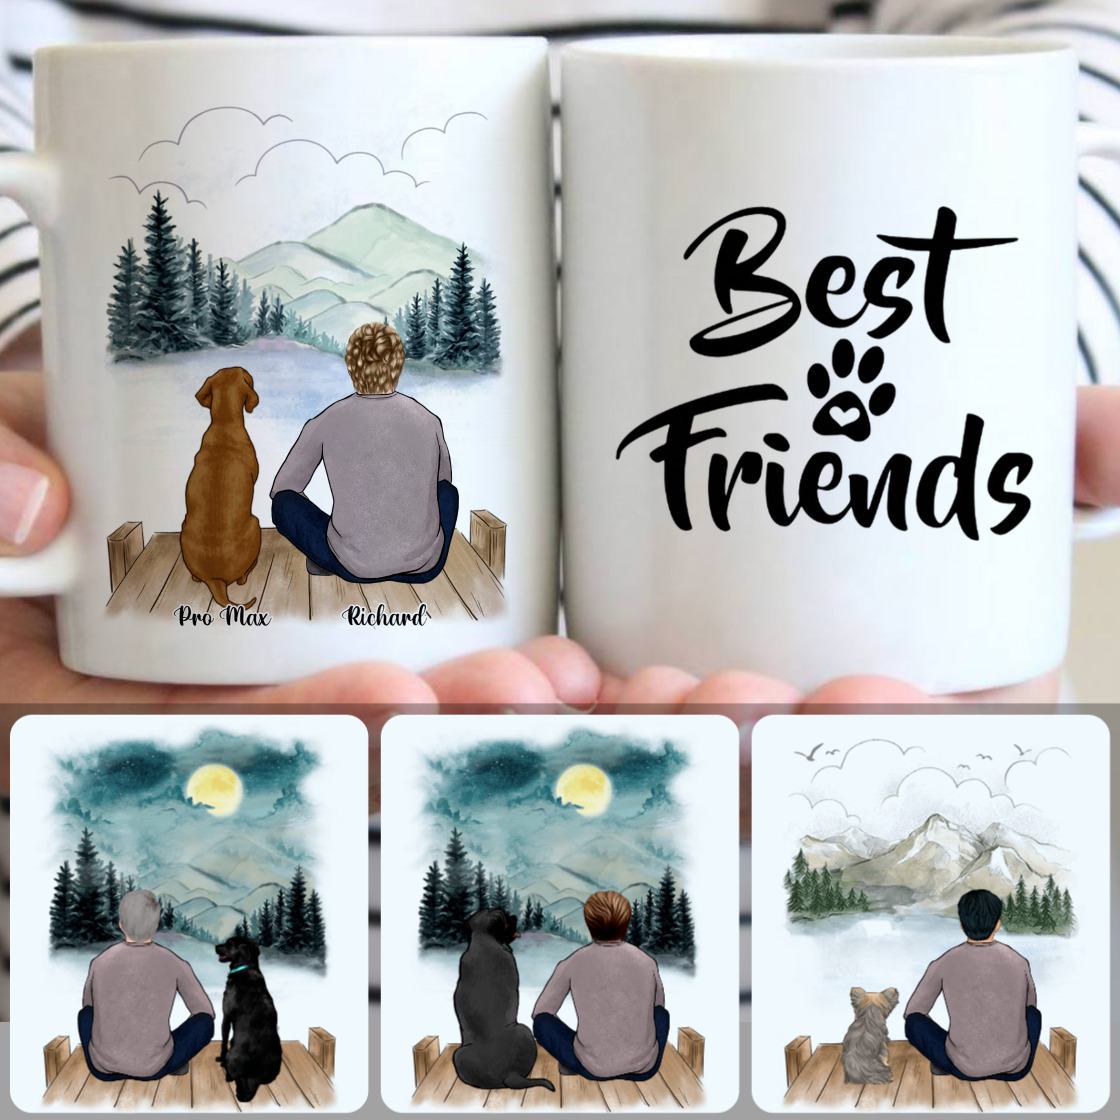 Personalized Mug, Special Gifts For Him Husband Boyfriend, Man & Dog Customized Coffee Mug With Names